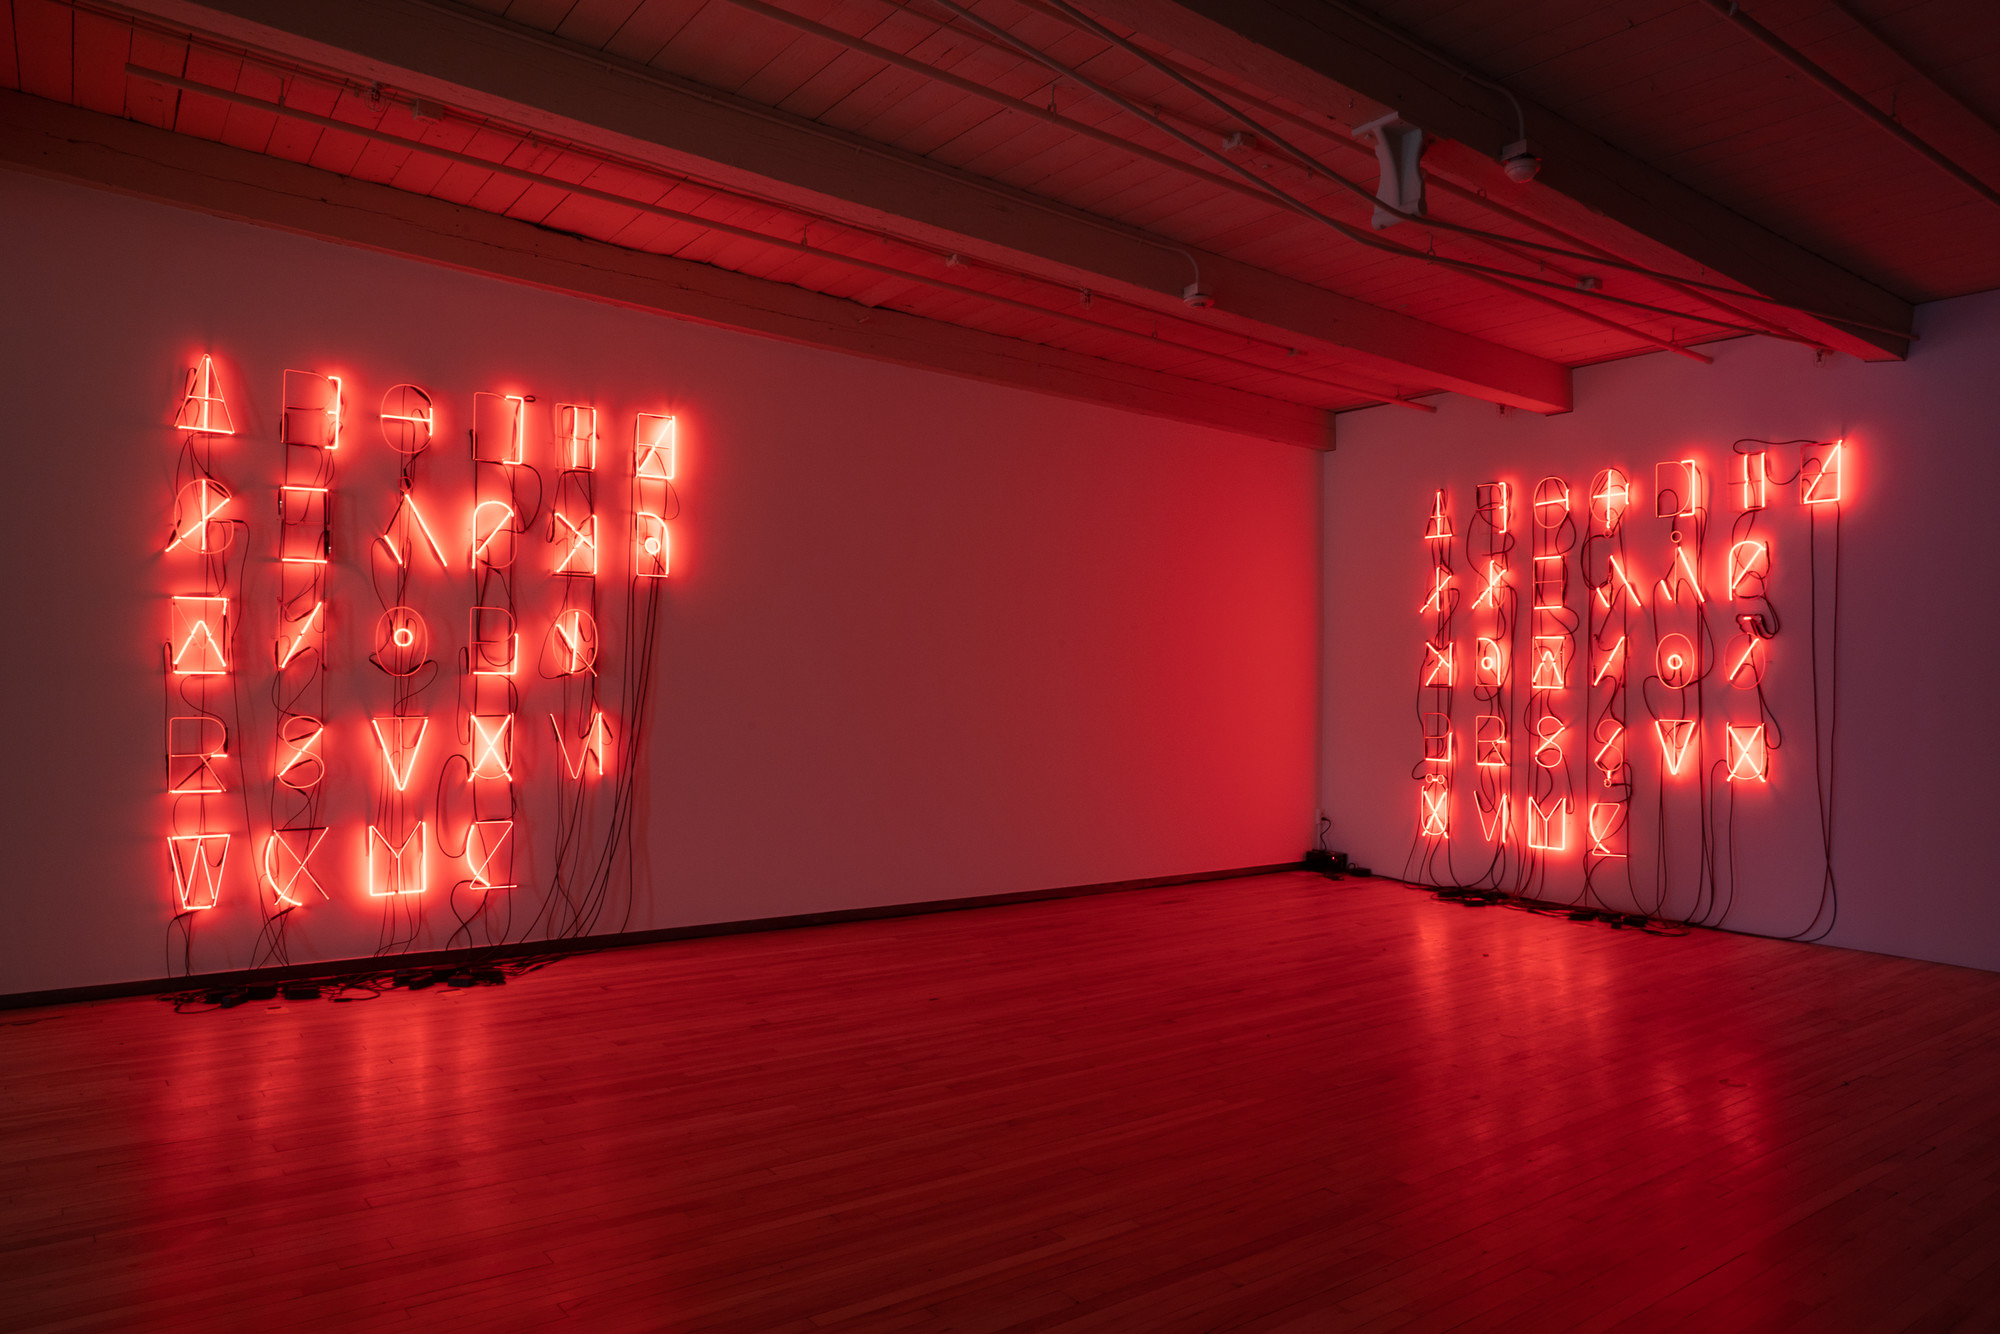 Photograph of Aslı Çavuşoğlu works as installed in the exhibition 'Kissing through a Curtain' at MASS MoCA.